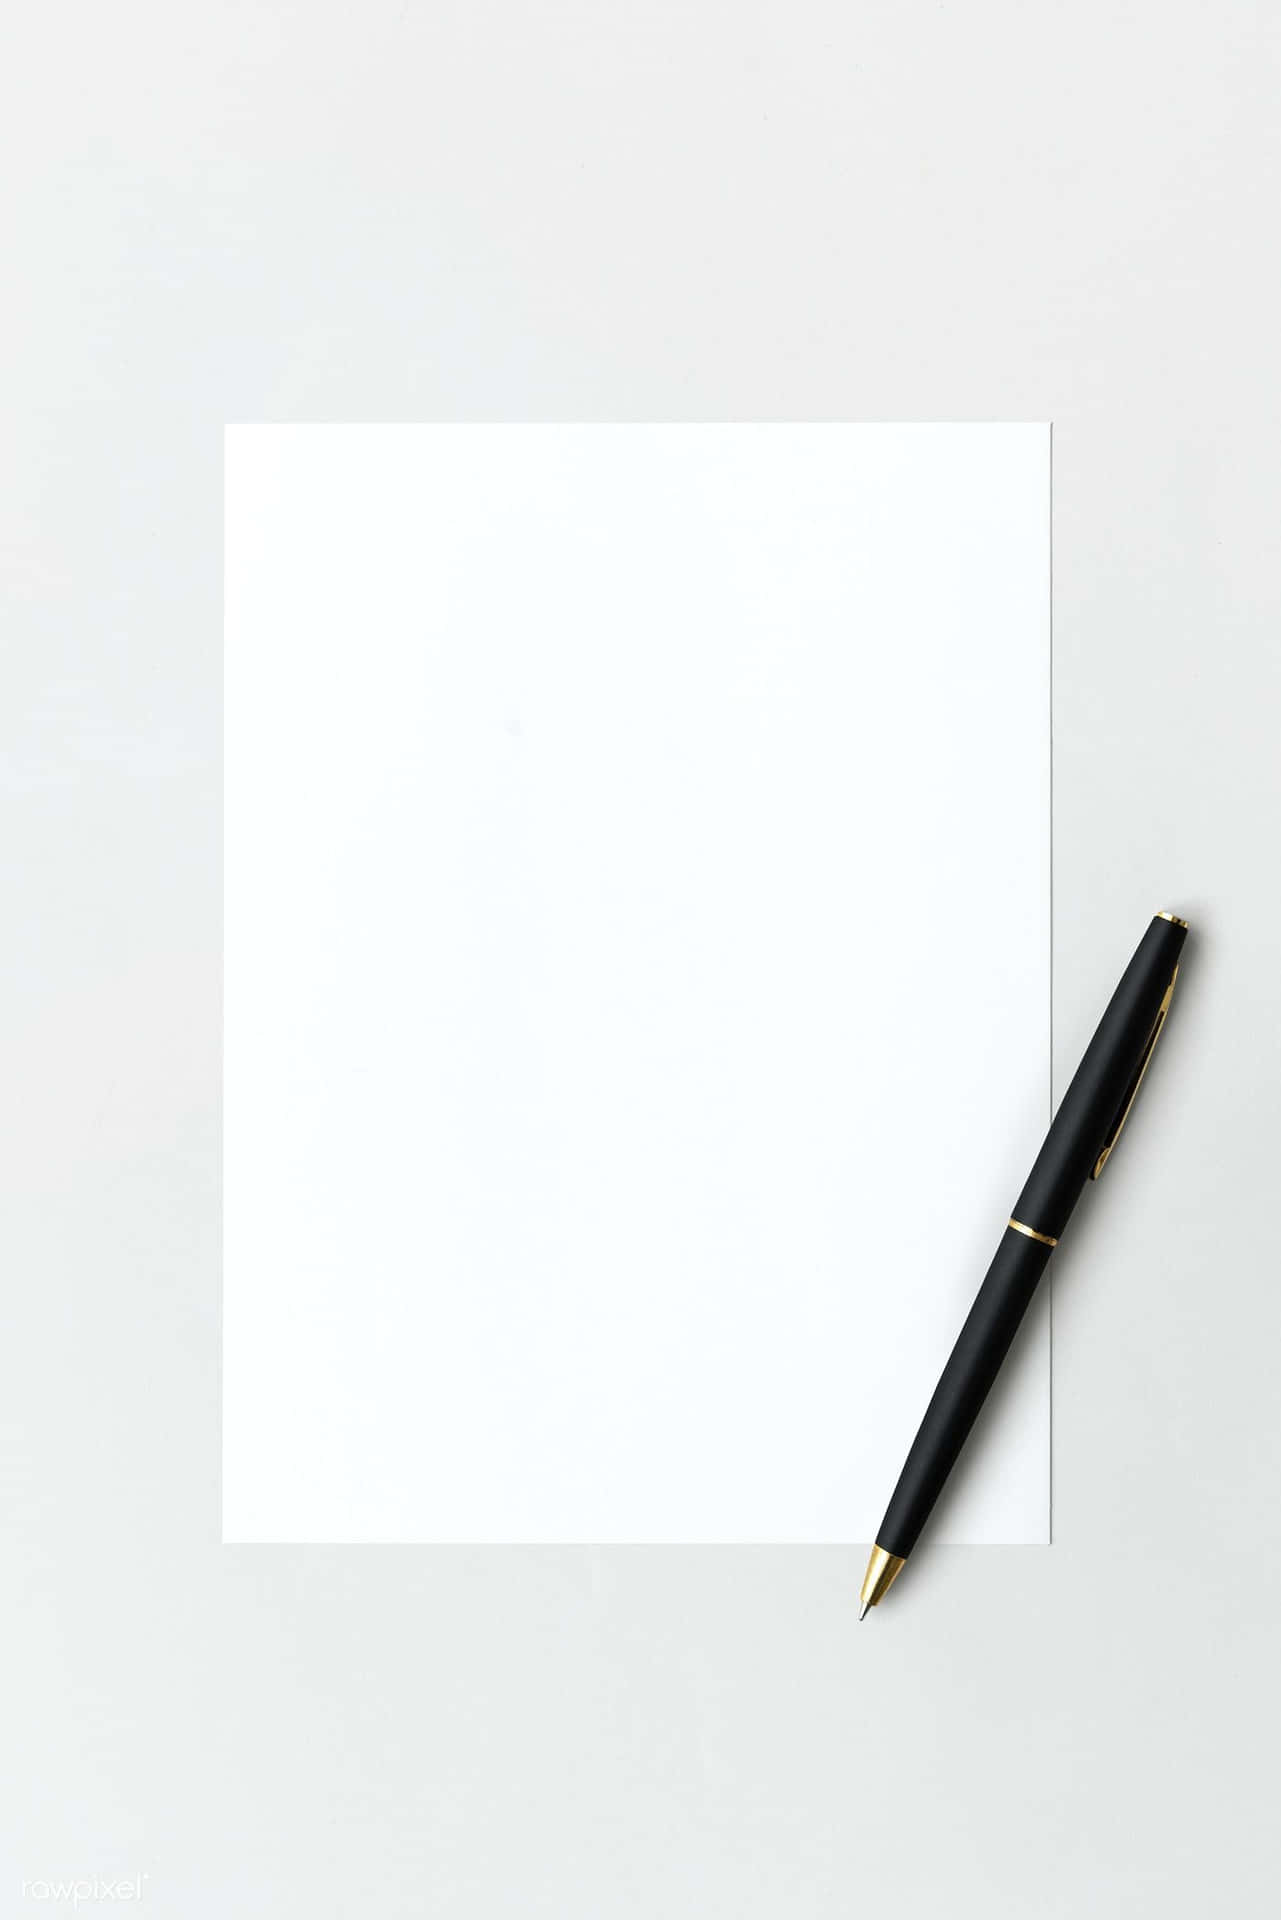 White Paper Background Ideal for Typography and Artwork